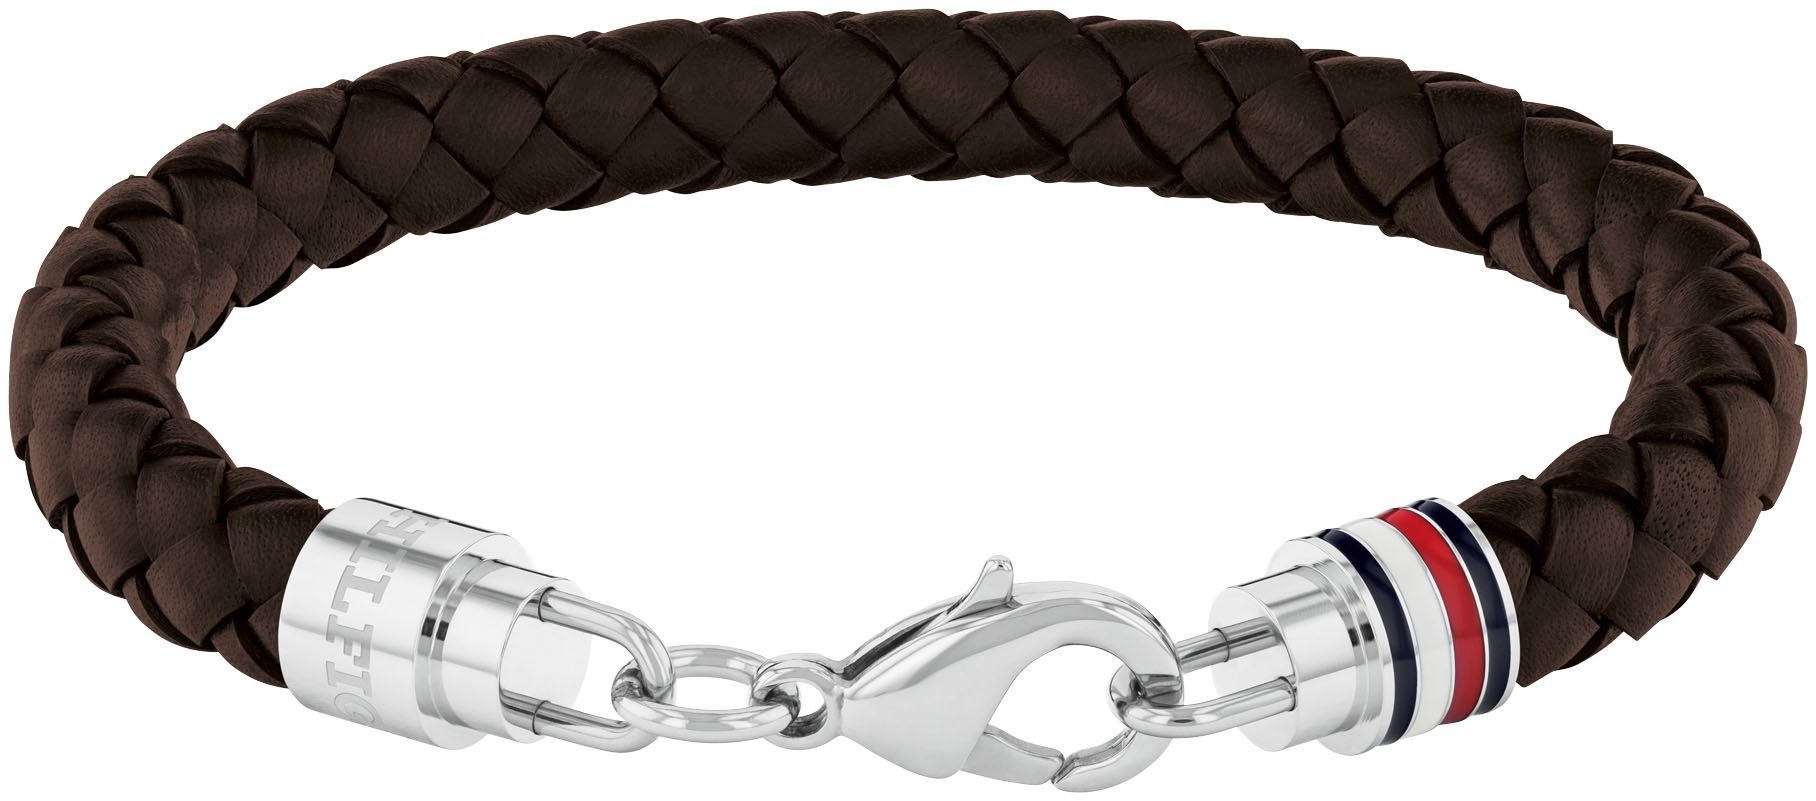 Tommy Hilfiger Lederarmband ICONIC TH BRAIDED LEATHER, 2790545, 2790546, mit Emaille